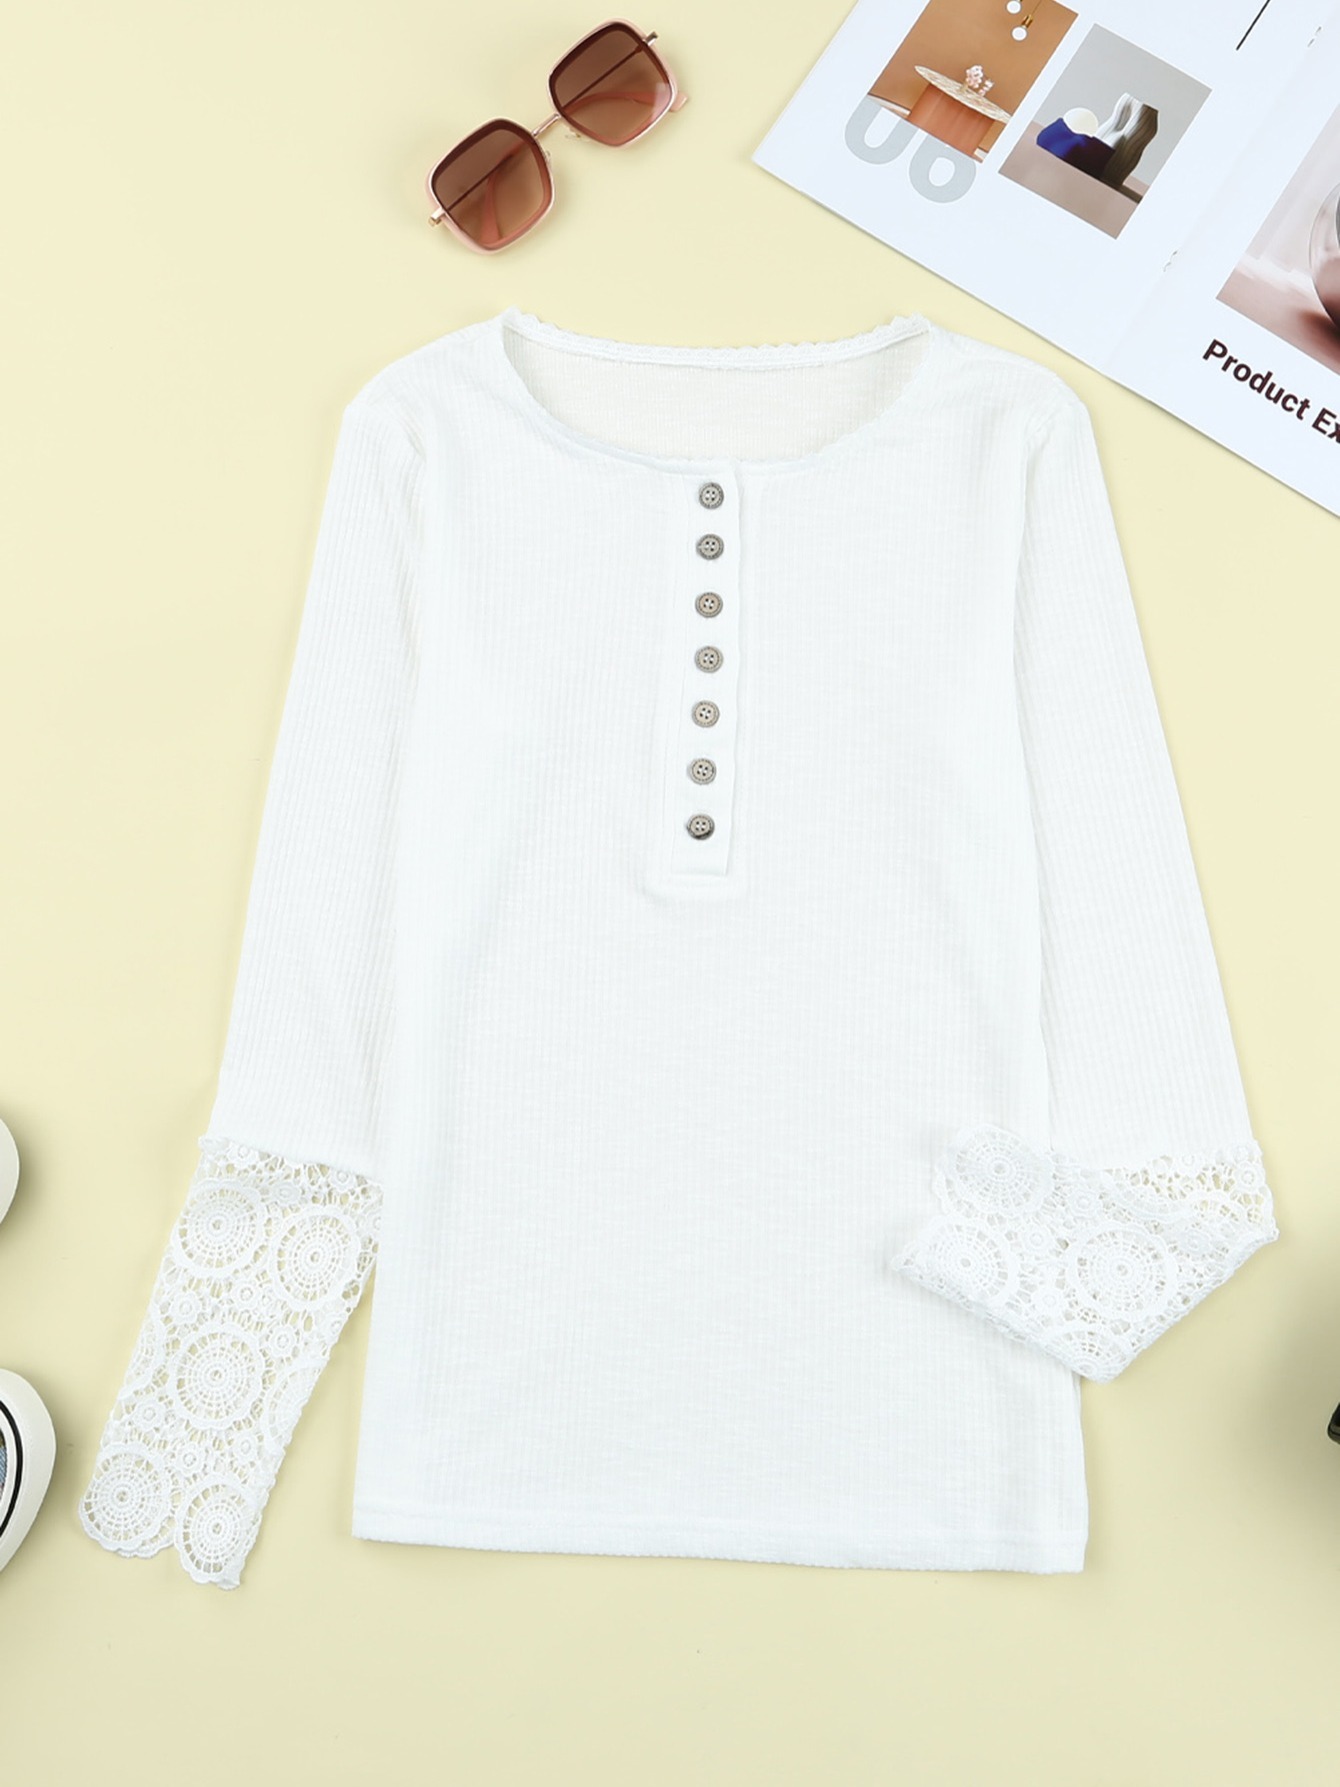 Long Sleeve Lace Henley  Lace top long sleeve, White long sleeve tshirt,  Long sleeve lace